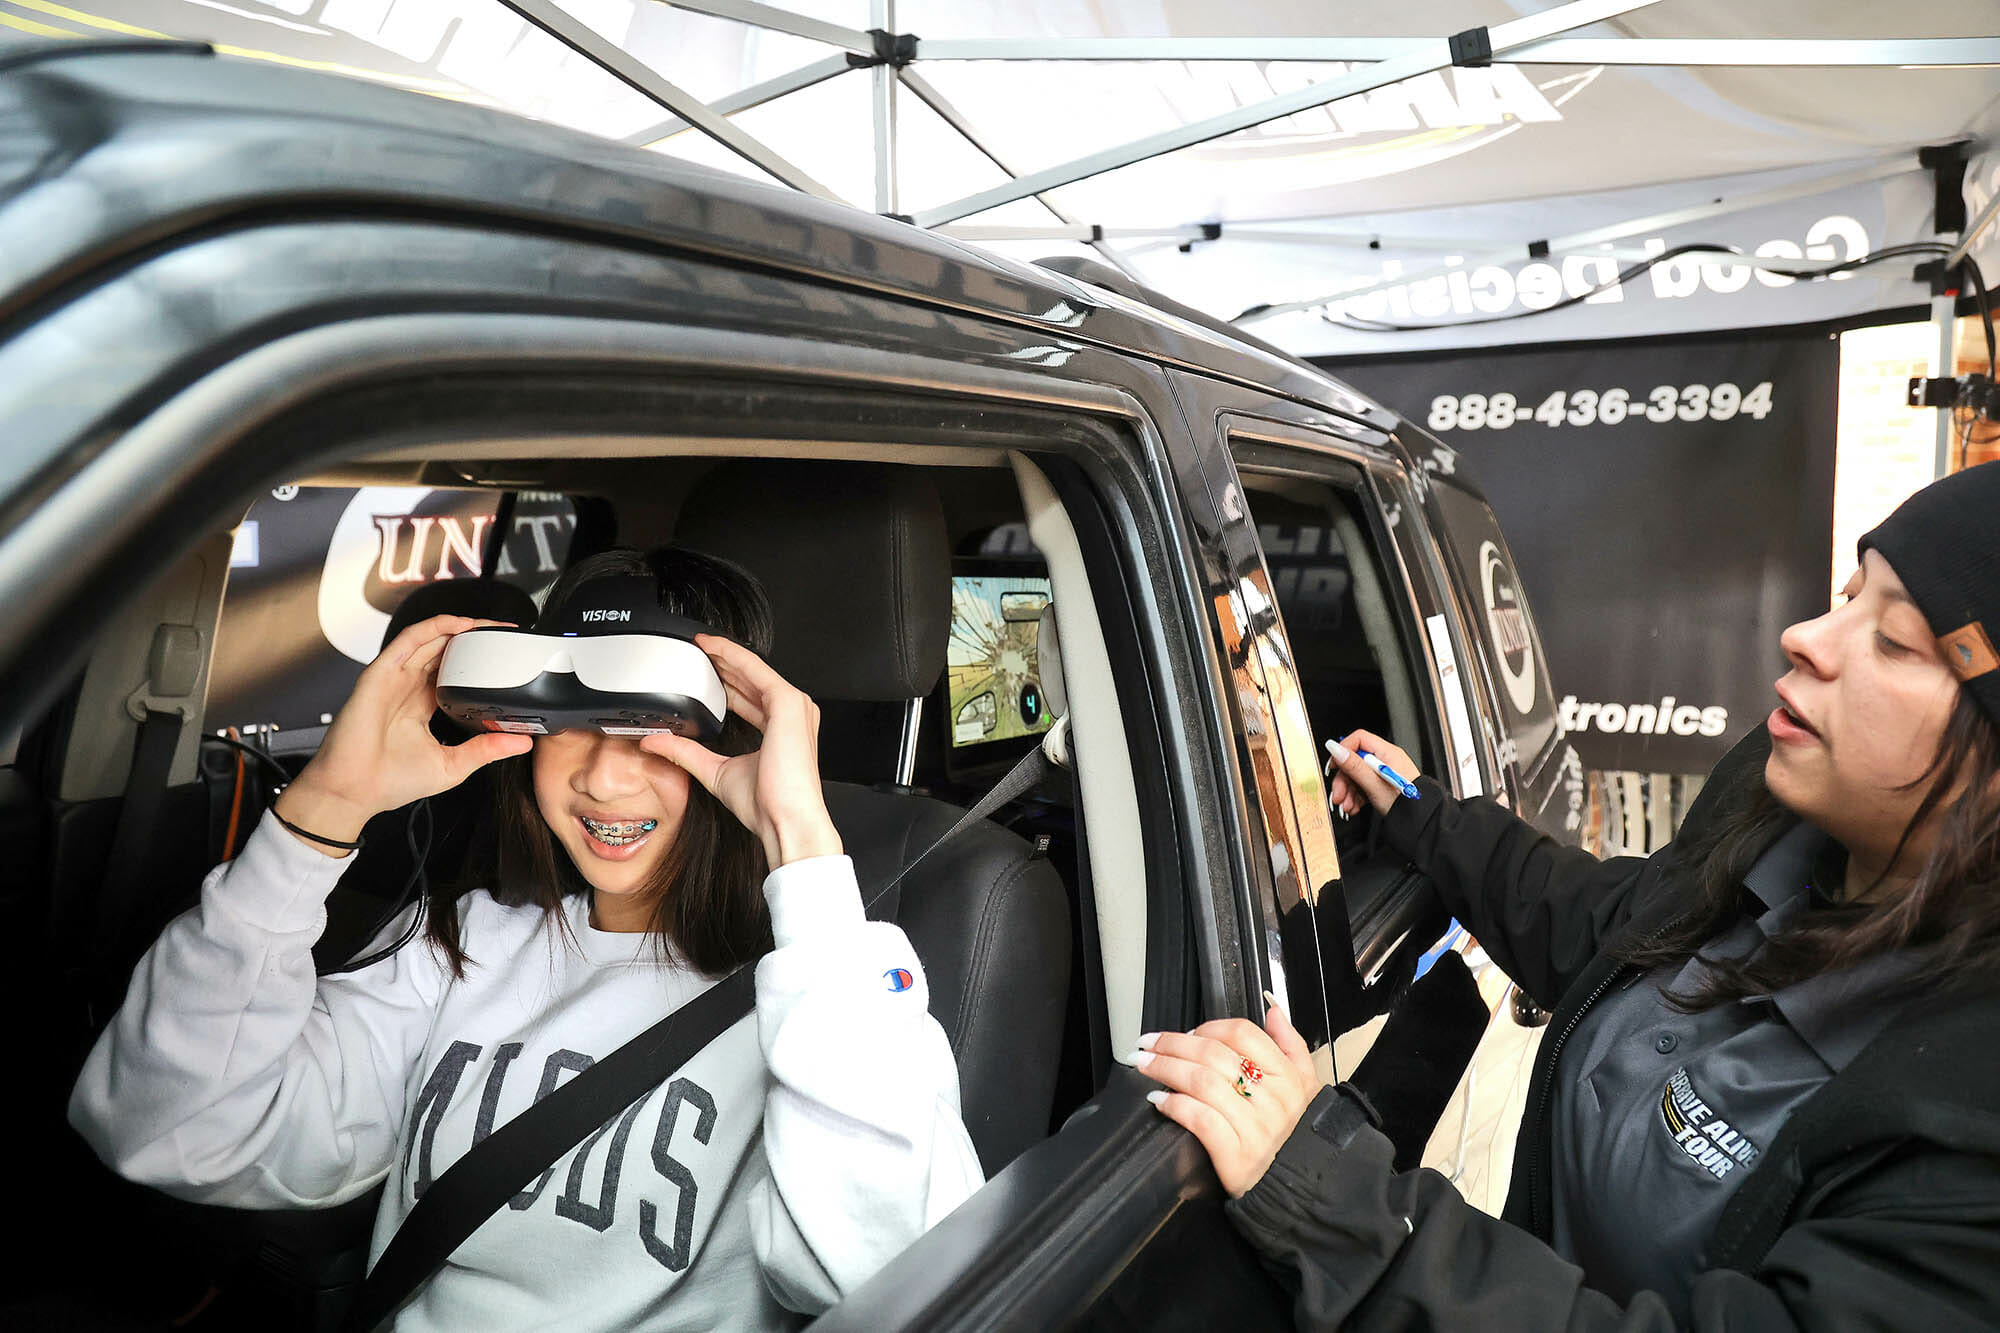 Drunk Driving Simulator From The Flint Journal - Arrive Alive Tour